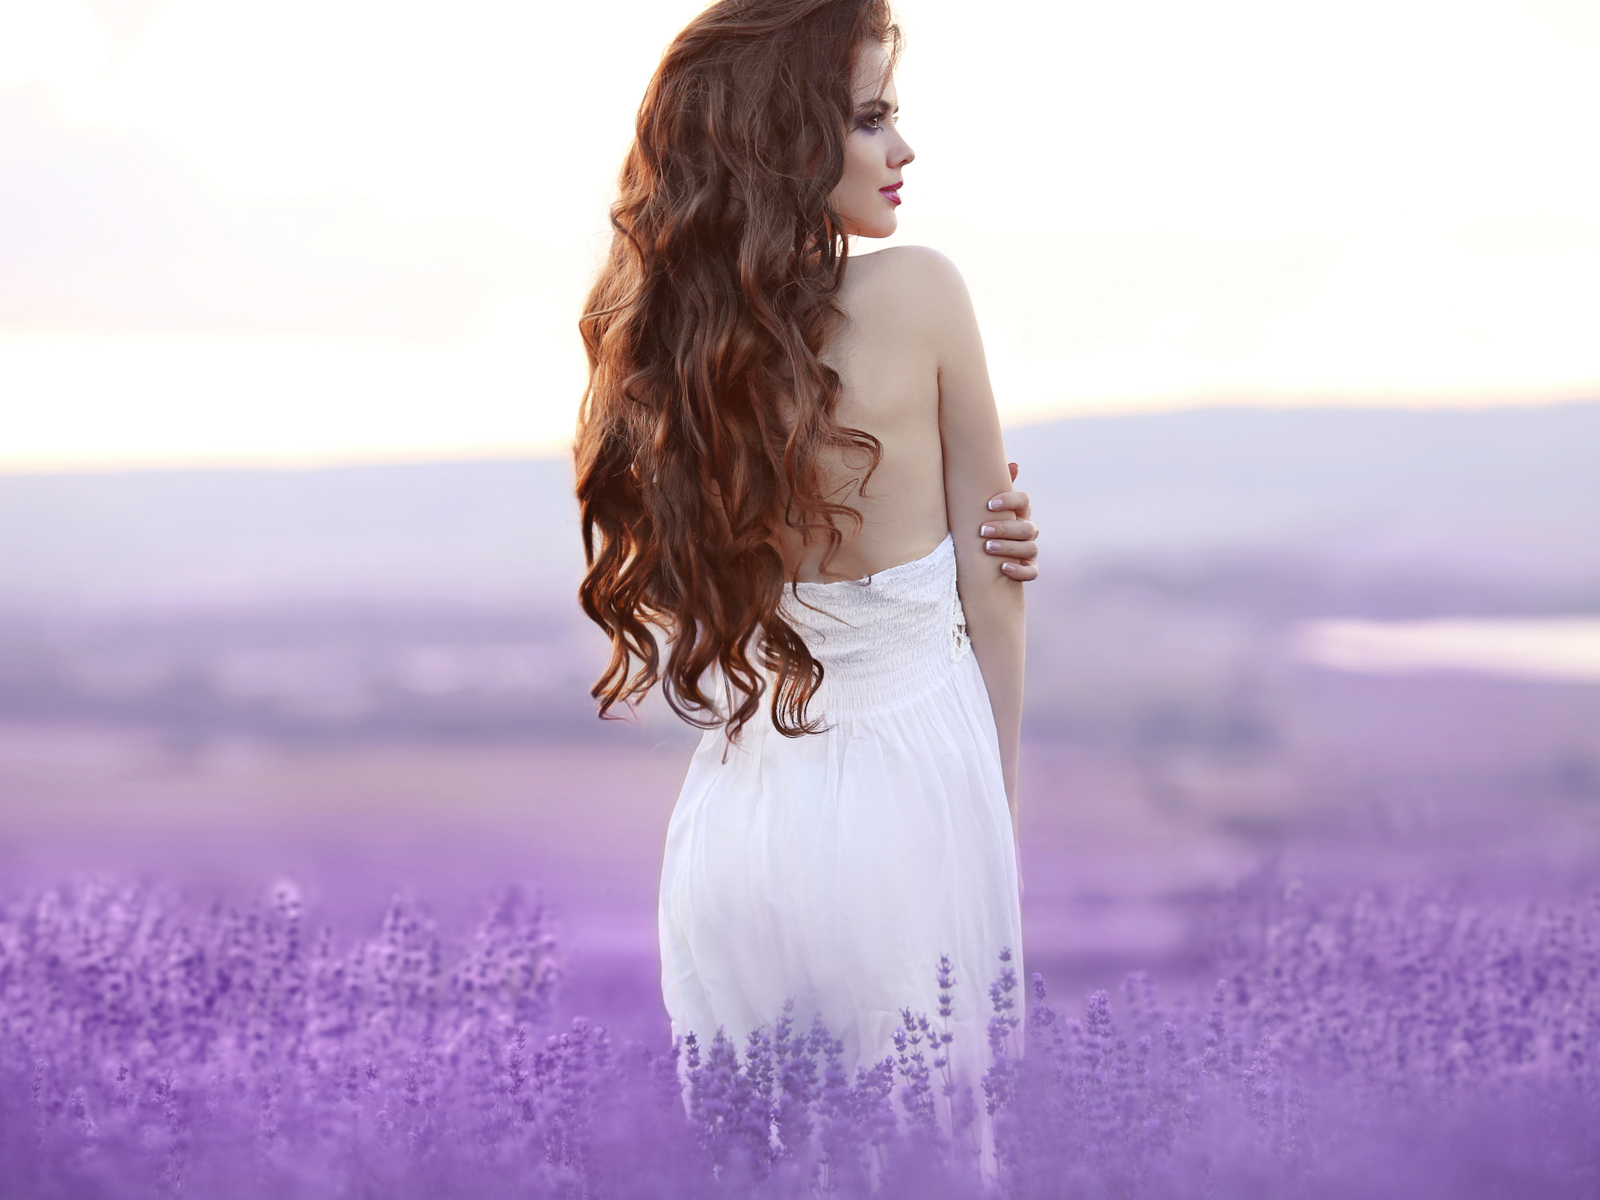 Woman with red waist length hair standing in a white dress in a field of purple flowers